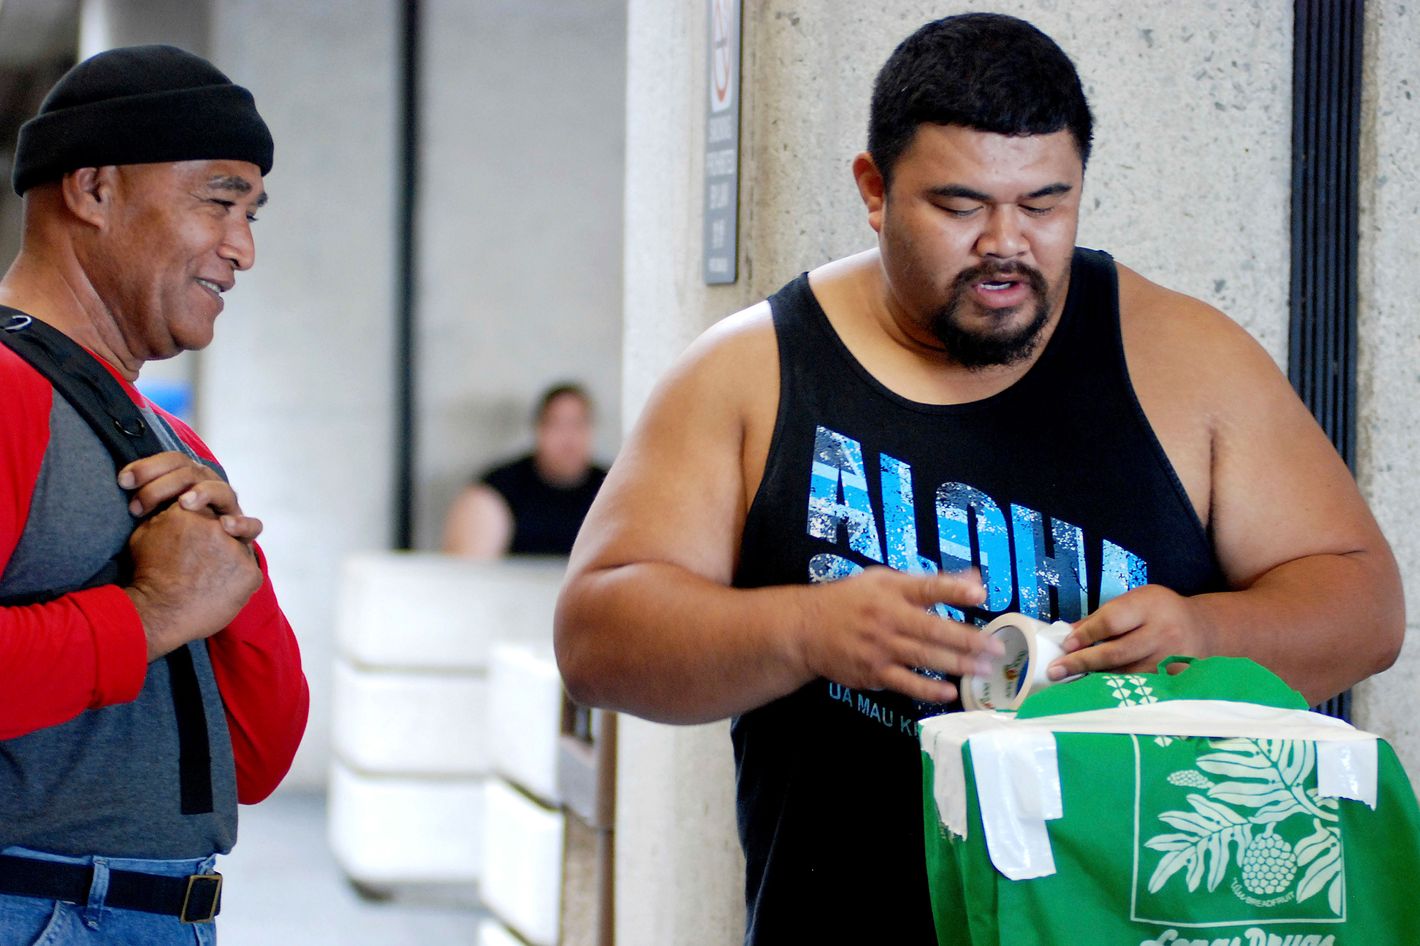 In this Oct. 10, 2016 photo, Mua Migi, left, watches his son Atimua Migi put tape on a carry-on bag before boarding a Hawaiian Airlines flight to Pago Pago, American Samoa at Honolulu International Airport in Honolulu. Atimua Migi doesn't like the airline's new policy of assigning seats at the airport after the airline conducted a survey that involved weighing passengers traveling between Pago Pago and Honolulu. (AP Photo/Jennifer Sinco Kelleher)